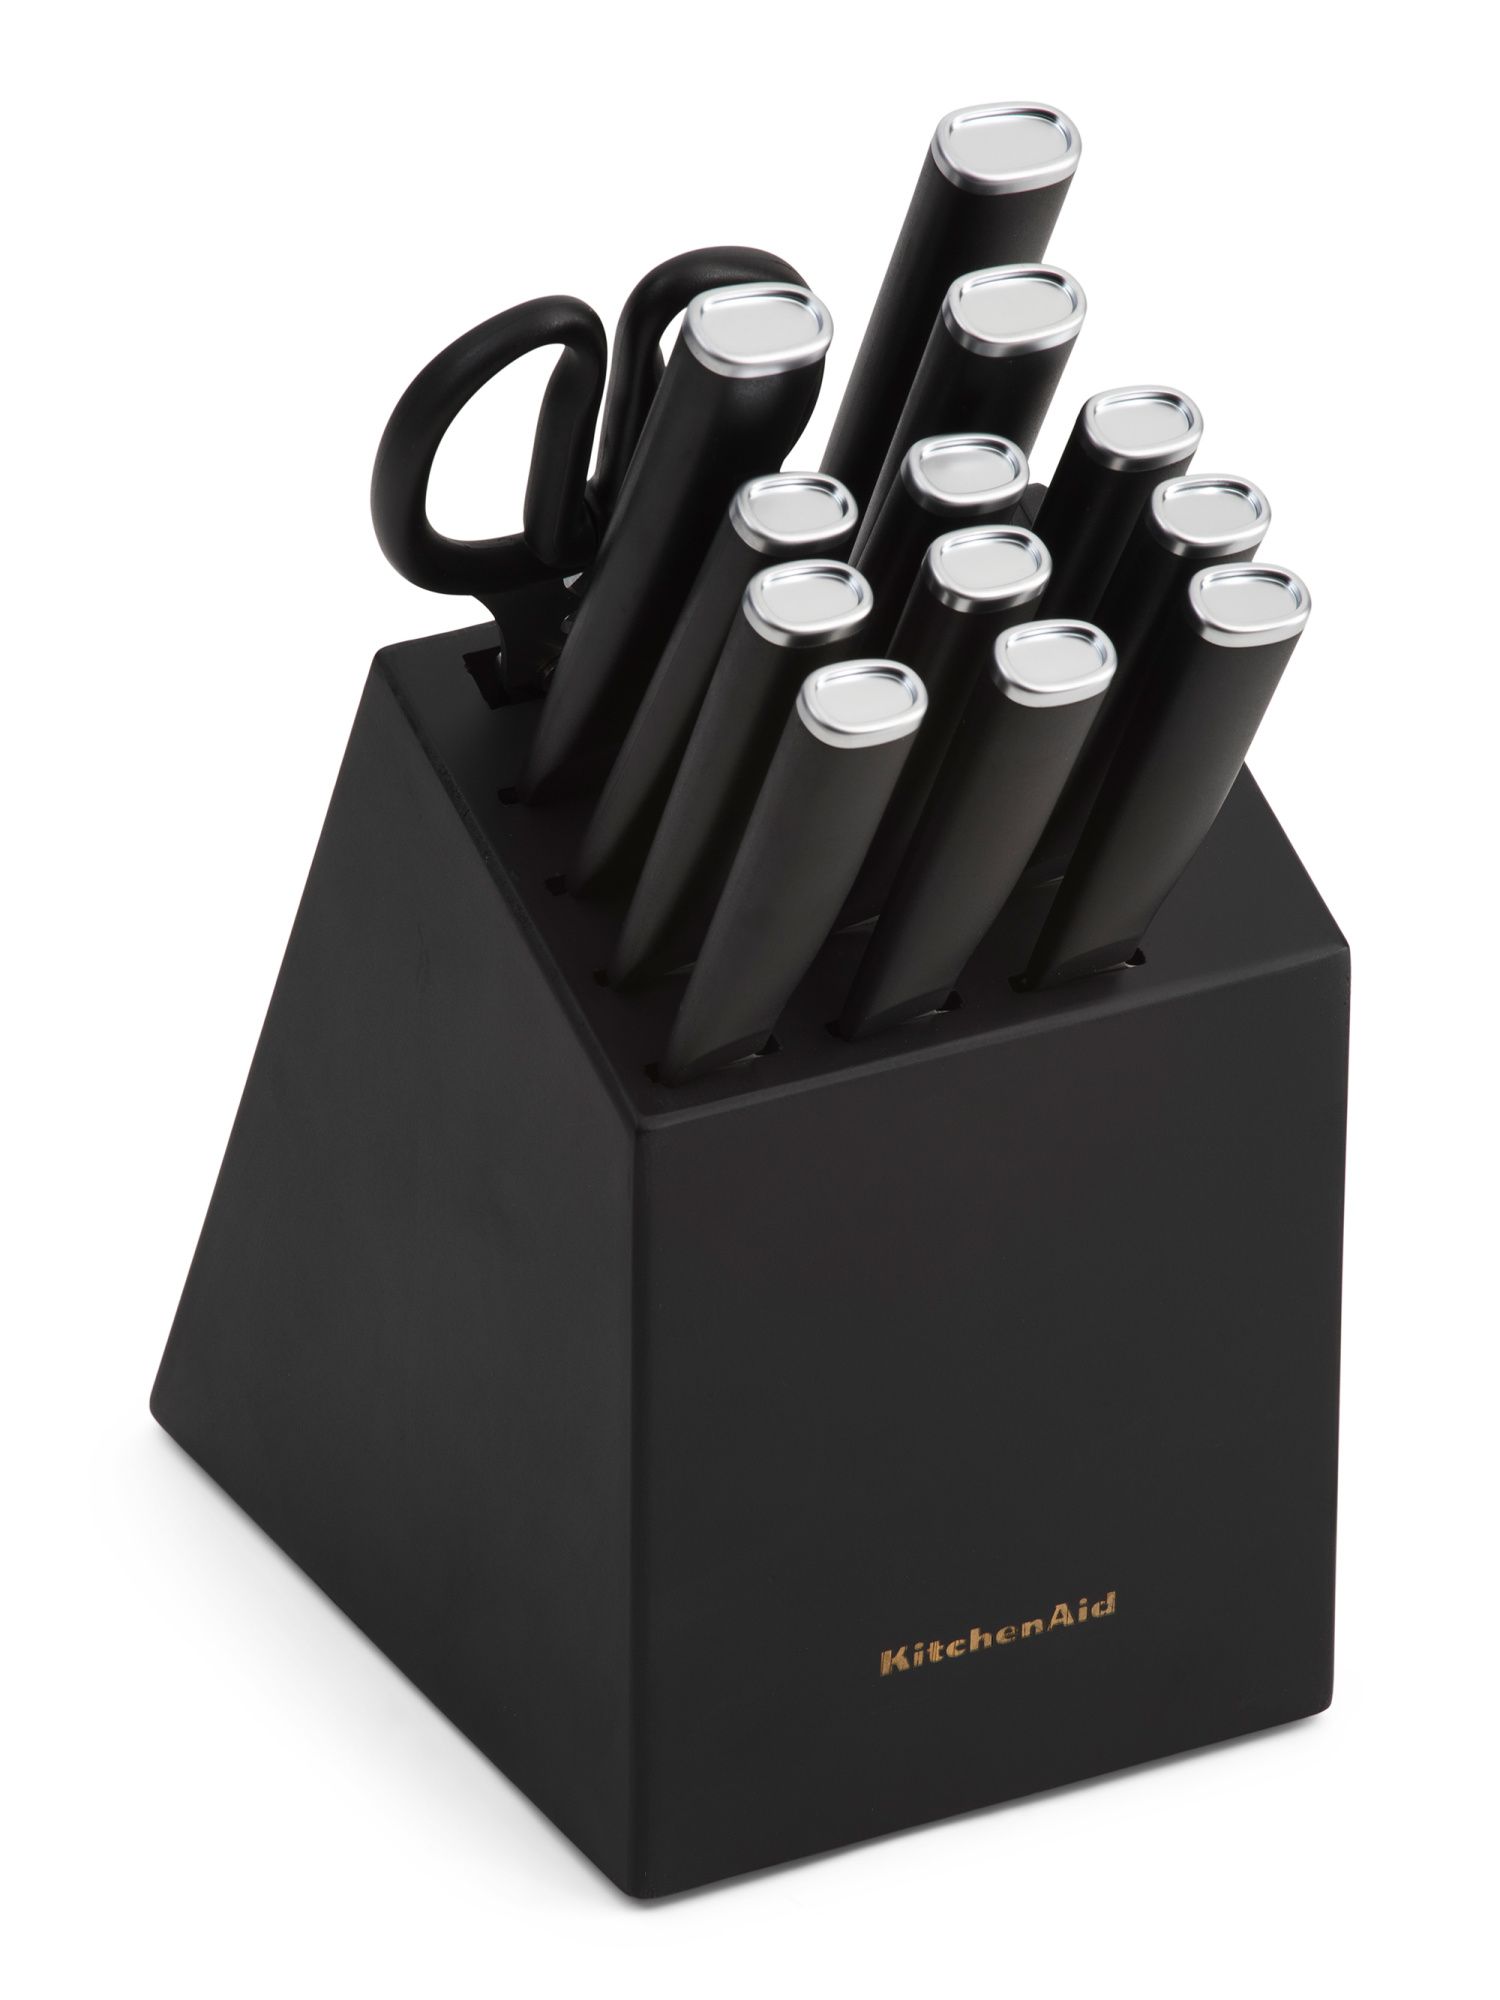 14pc Stainless Steel Japanese Cutlery Set | TJ Maxx